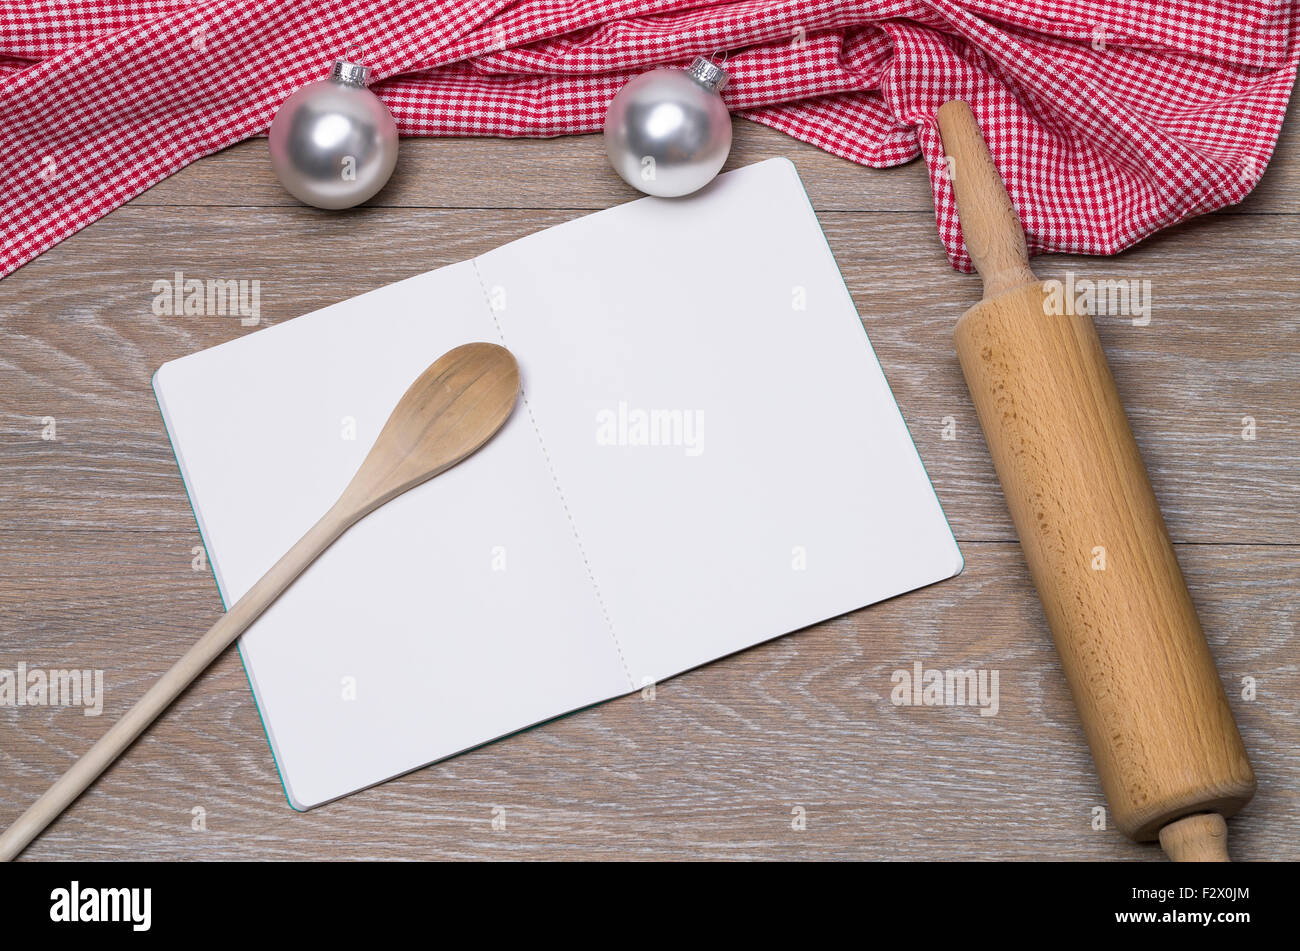 Image shows an open booklet with rolling pin and christmas balls on a table Stock Photo